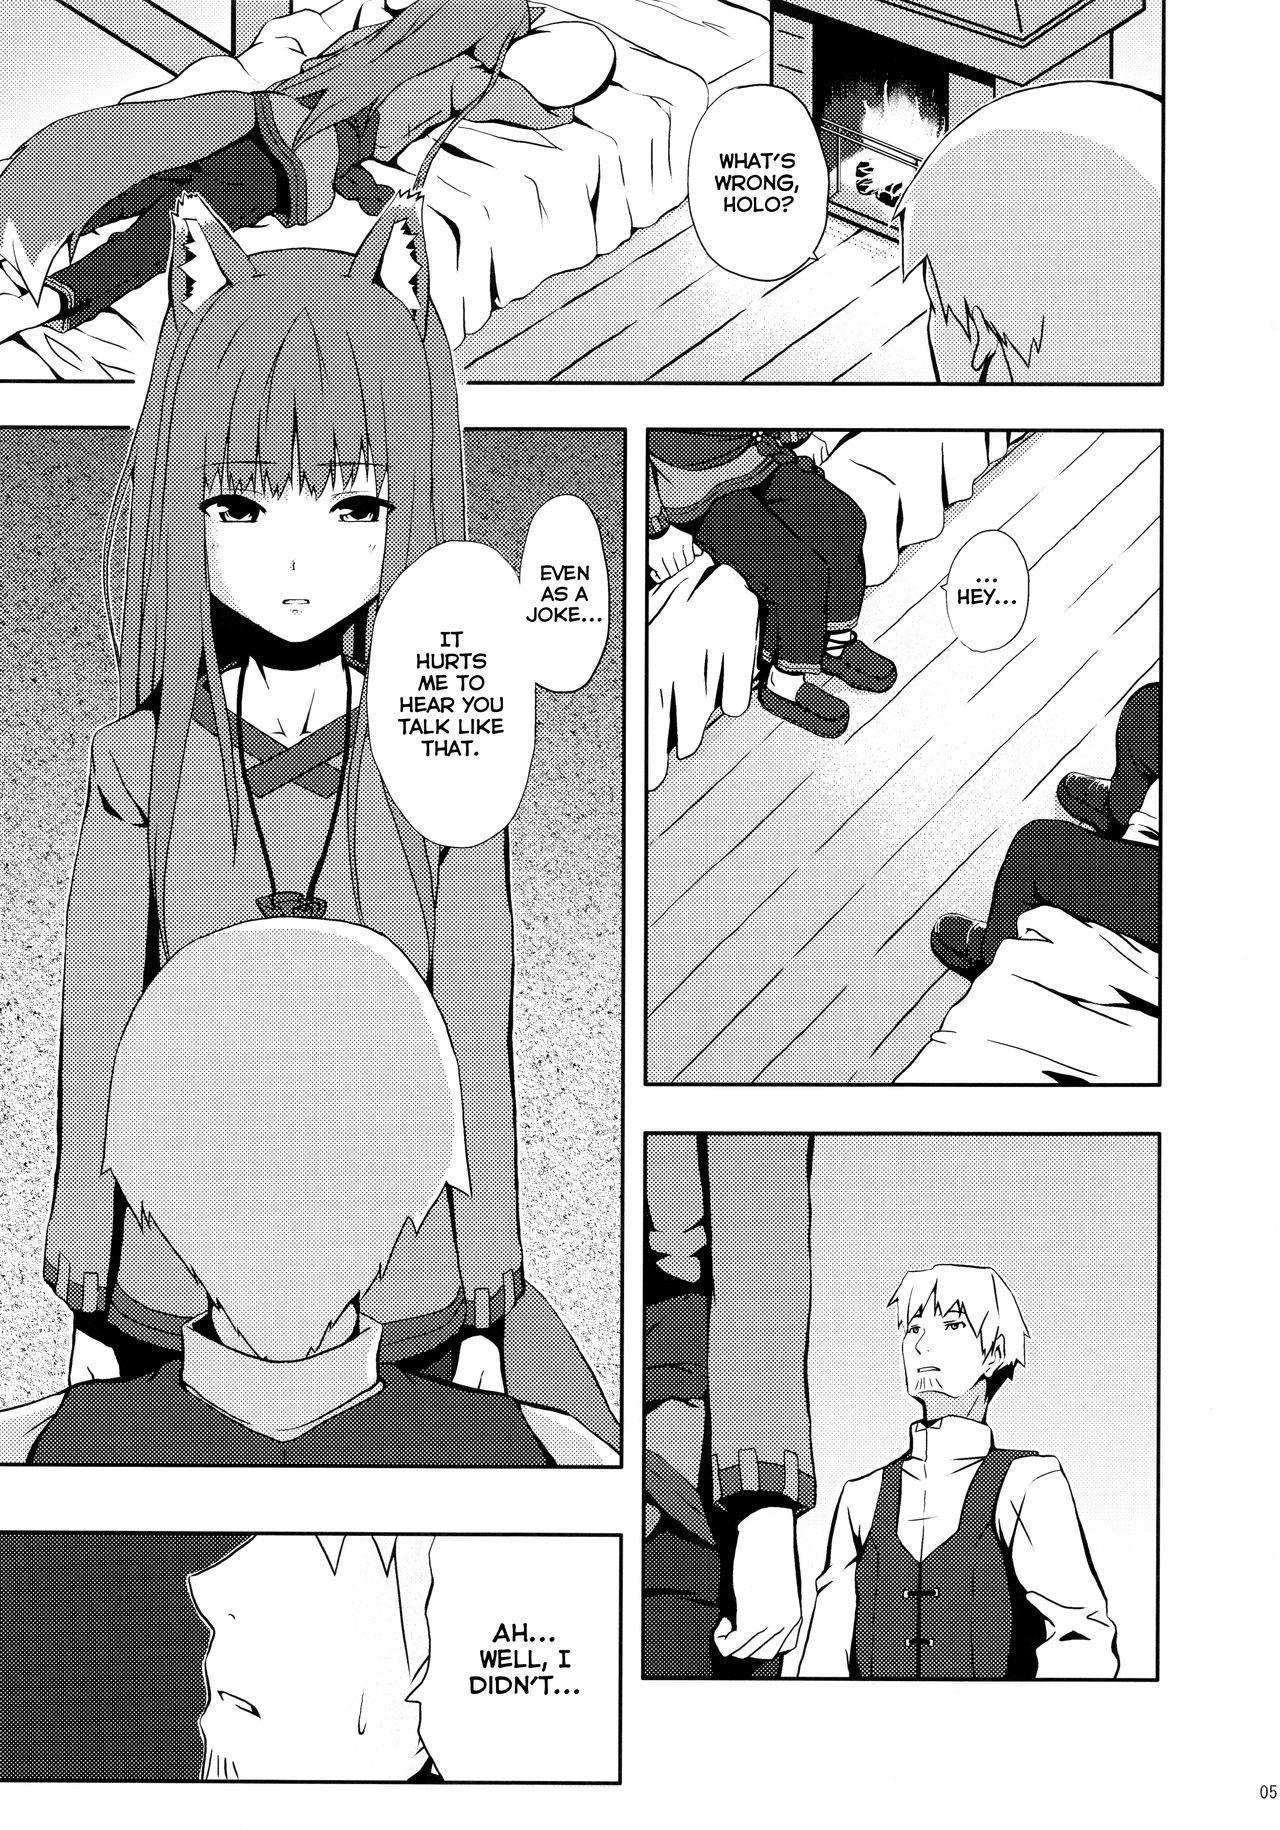 Style Bitter Apple - Spice and wolf Two - Page 5